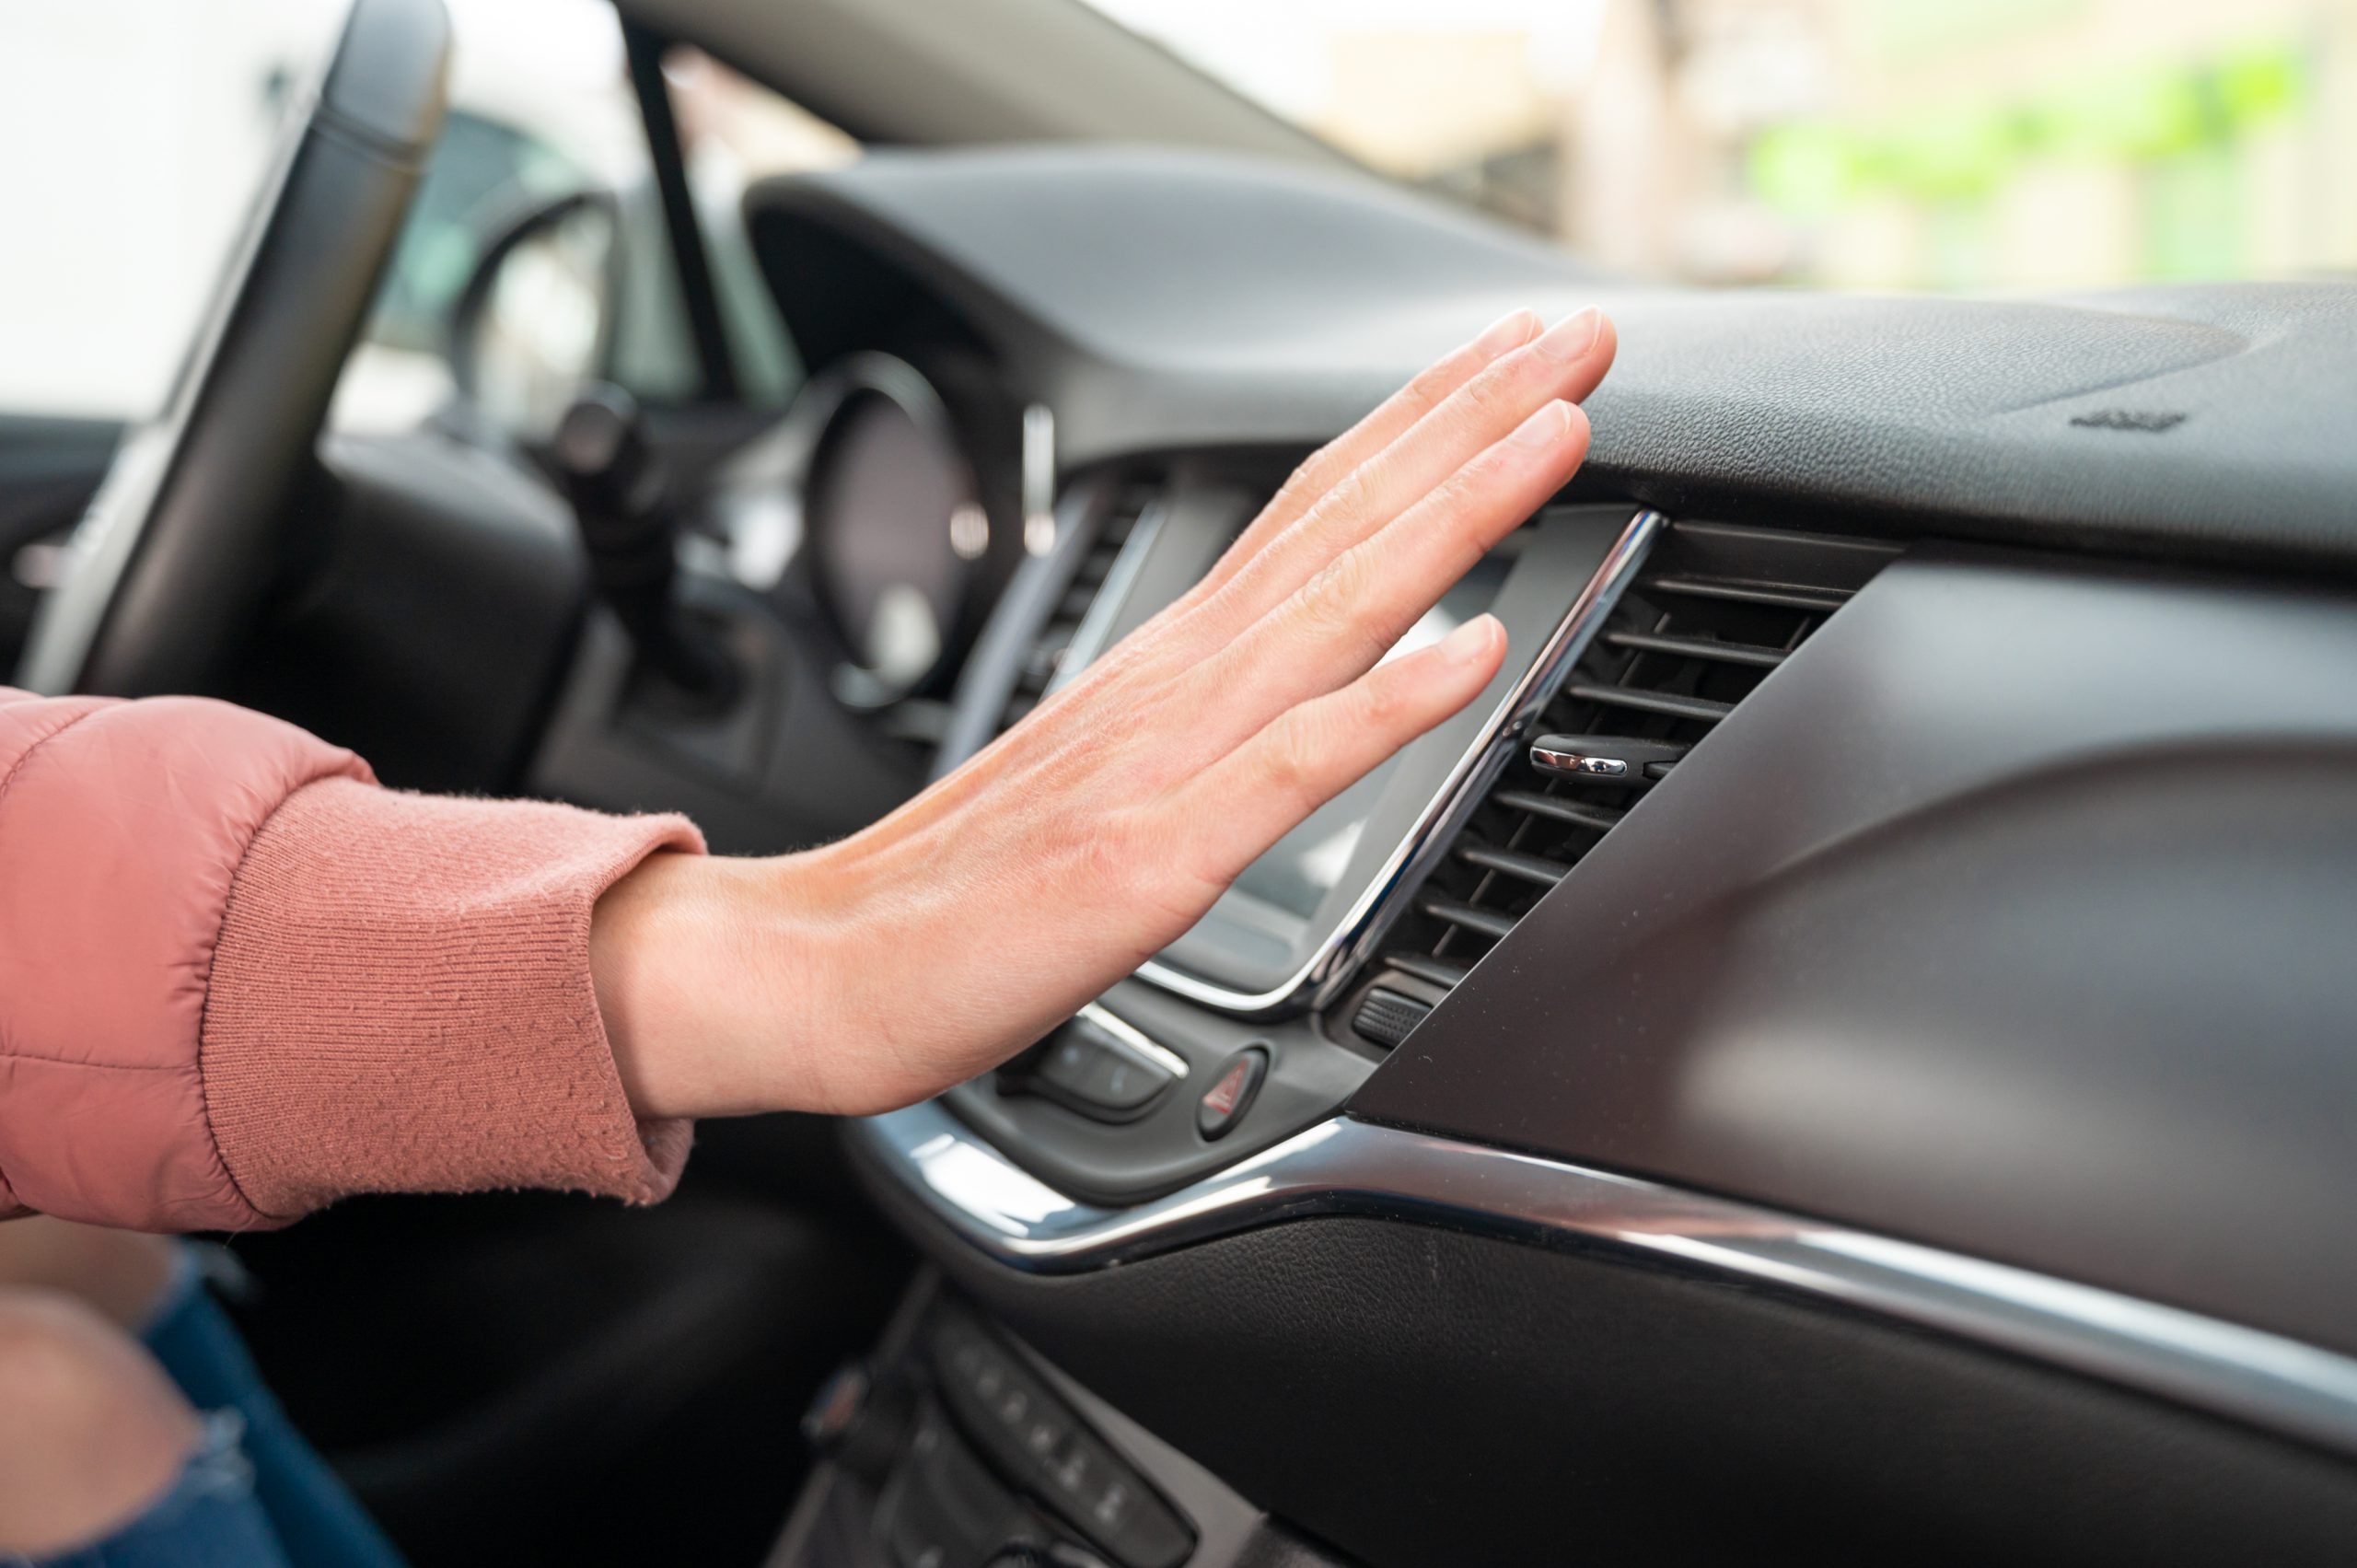 Woman using hand palm in front of AC vents to feel the speed and temperature of airflow during summer heat.